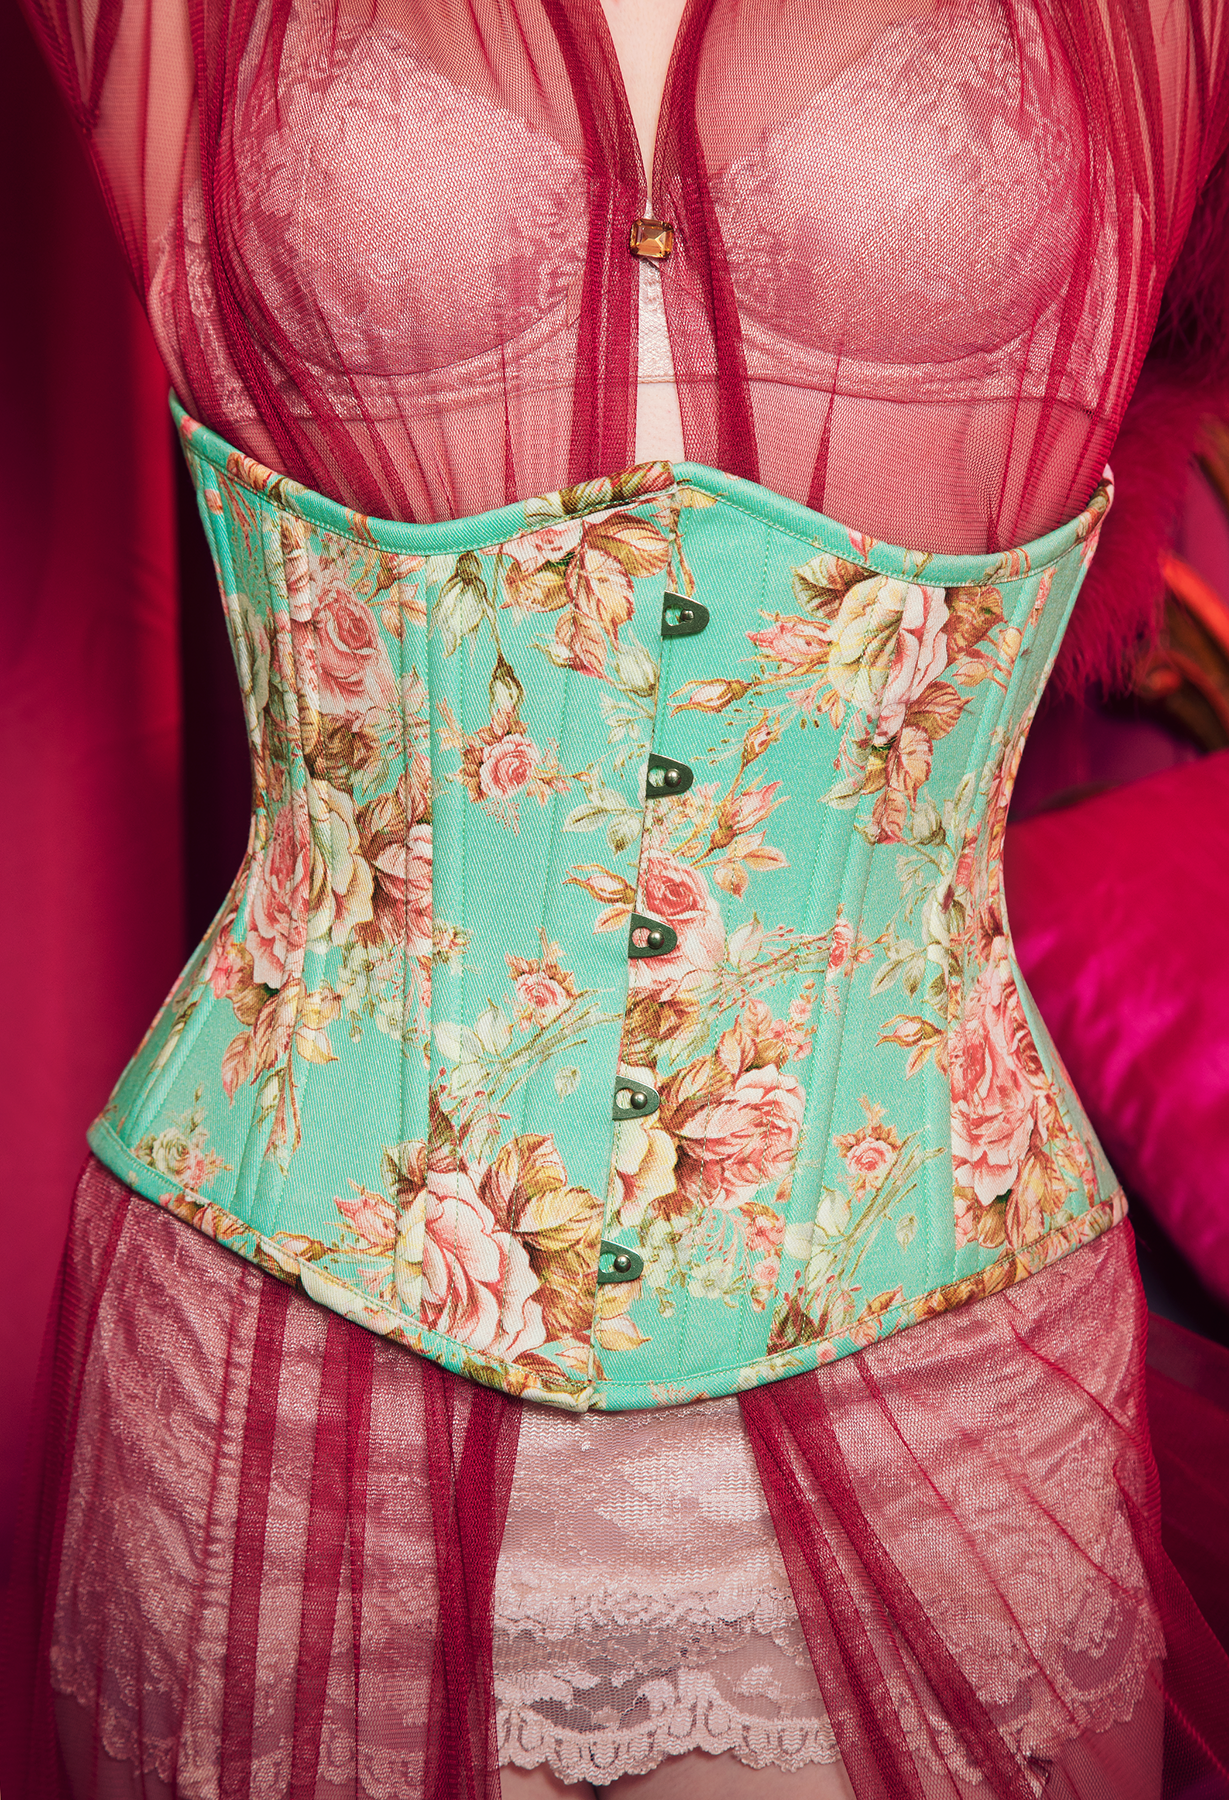 Victorian Riding Corset in Summer Floral - LAST CHANCE SALE